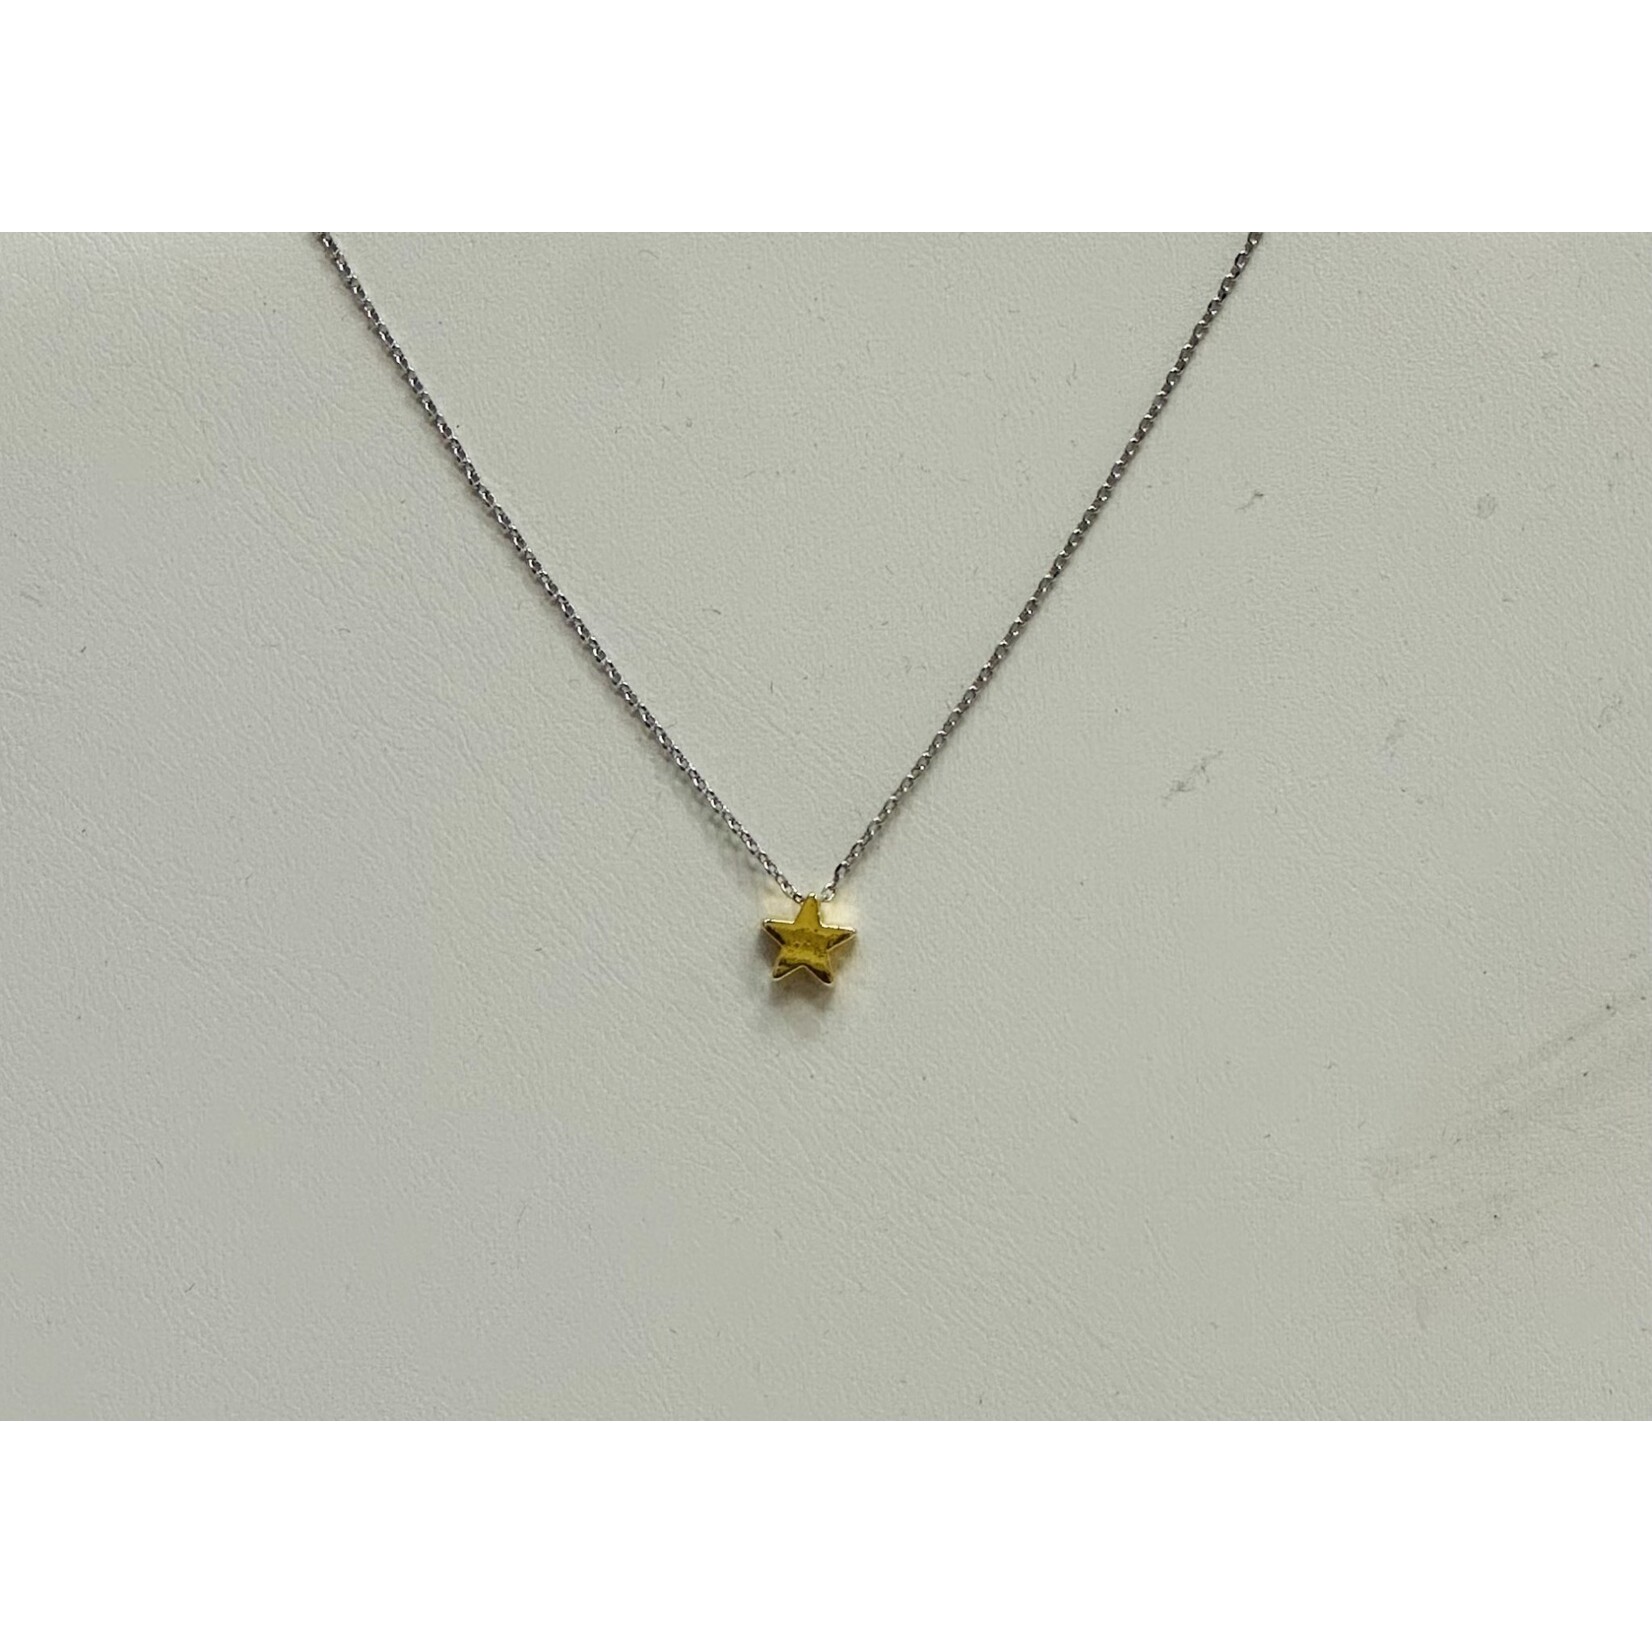 2 Tone Star Necklace